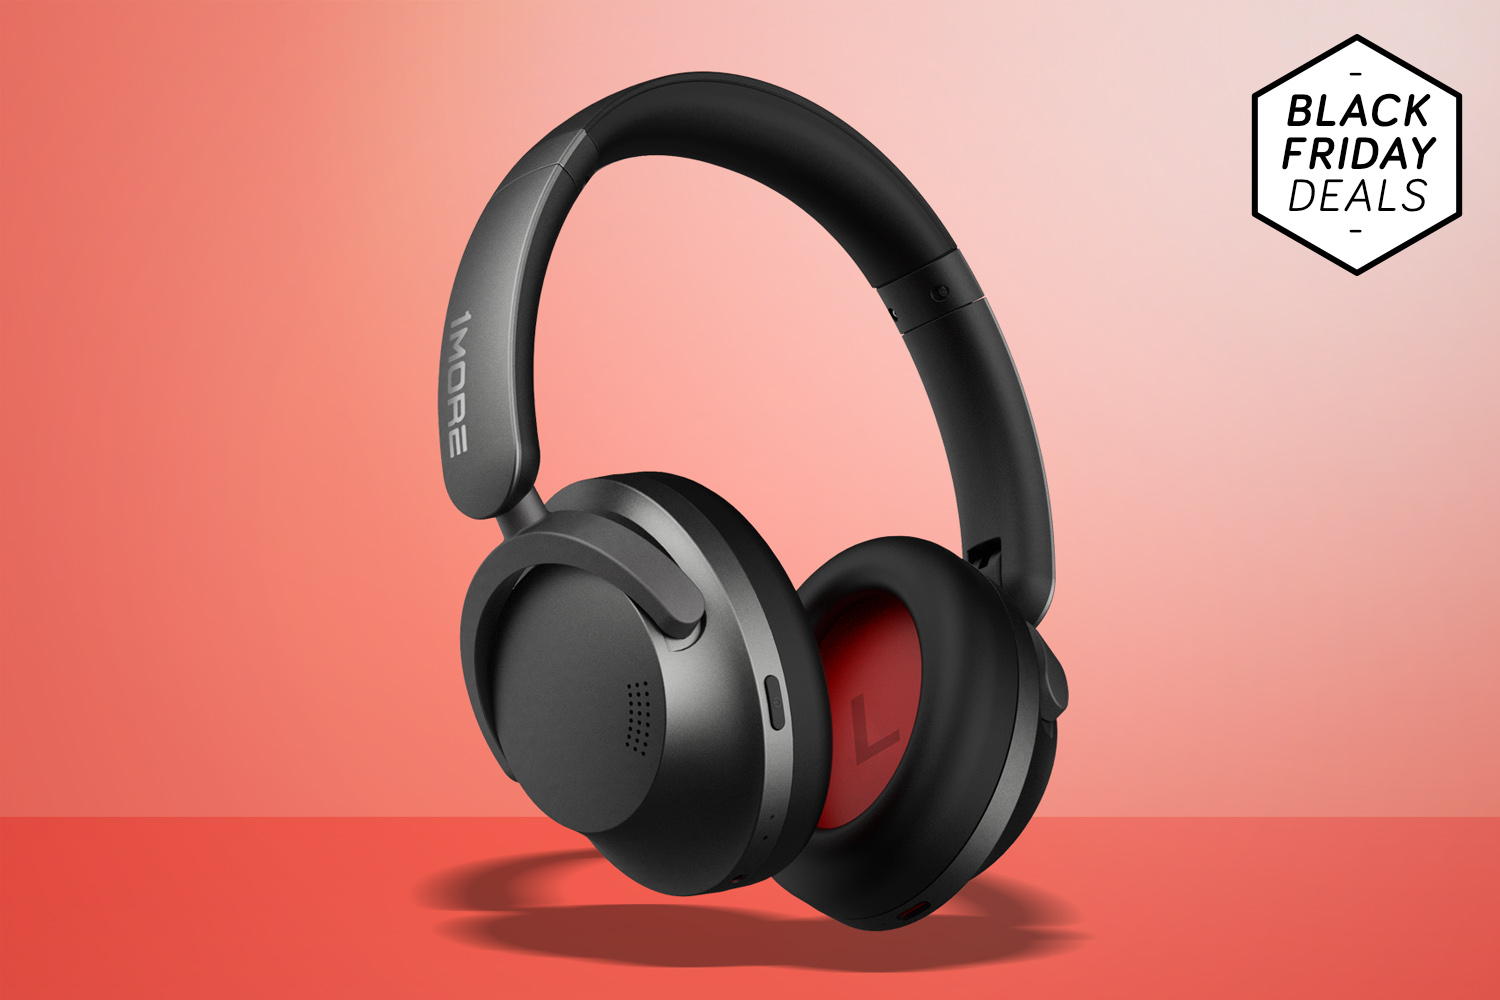 1More Sonoflow review: These are the best headphones under $100